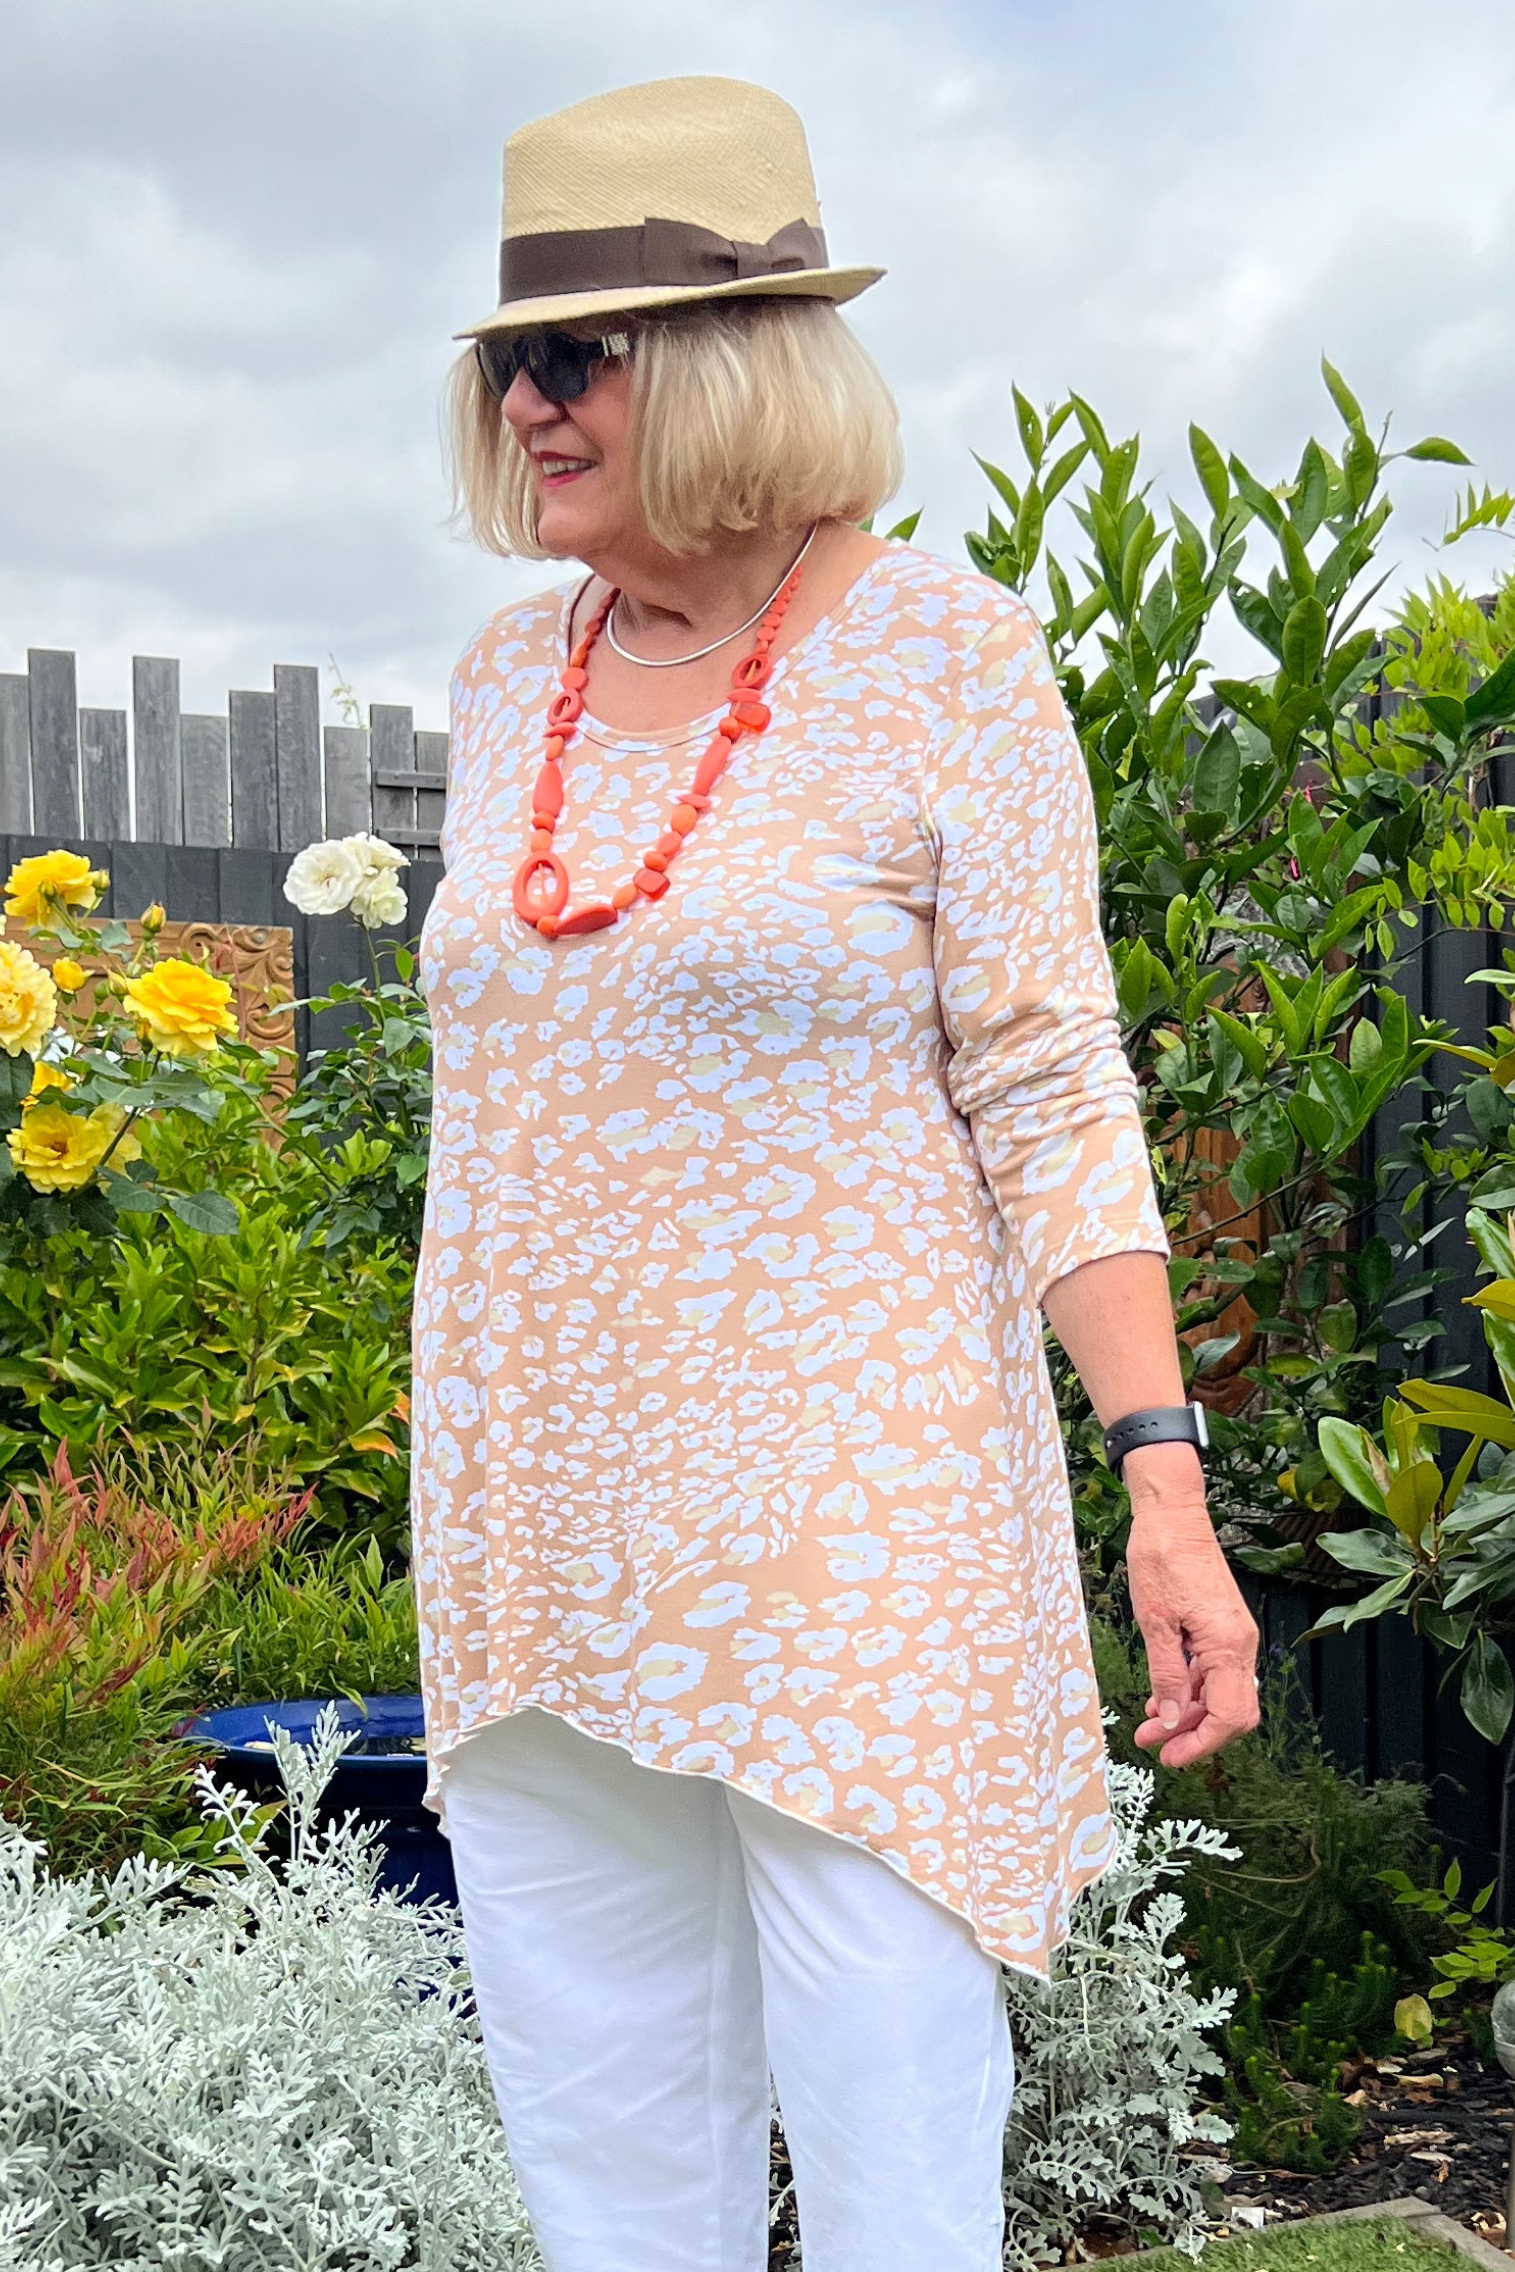 Kita Ku modelling a stretch jersey animal printed top Scoop in a garden setting.